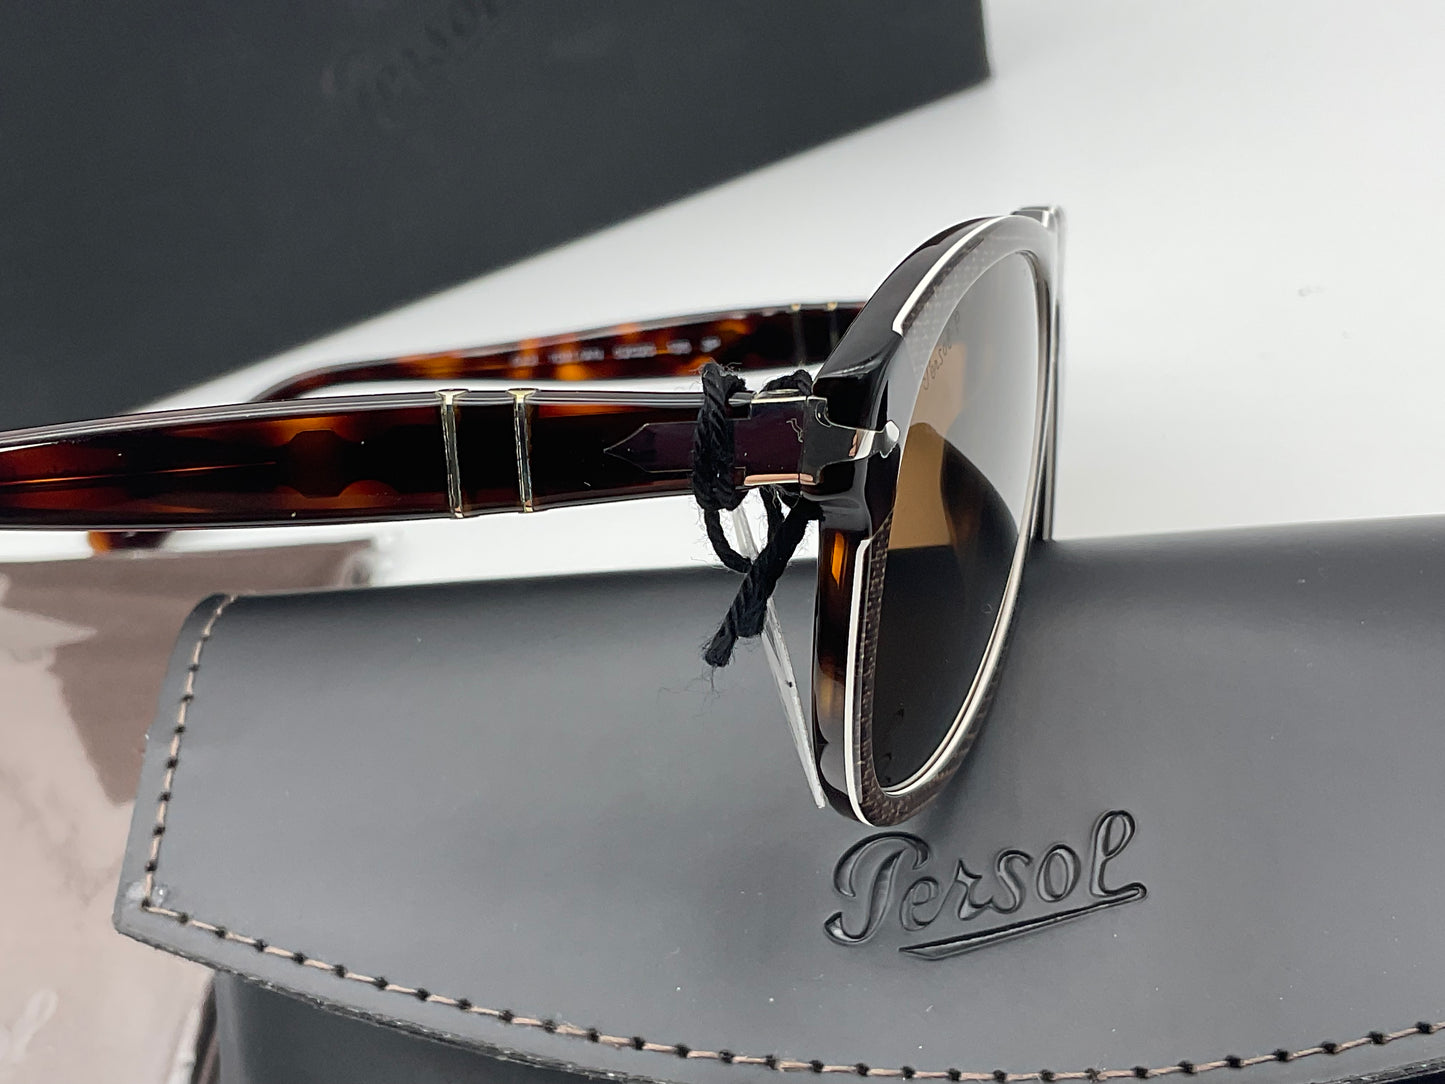 PERSOL SUNGLASSES 649 1091AN BROWN POLARIZED 52mm